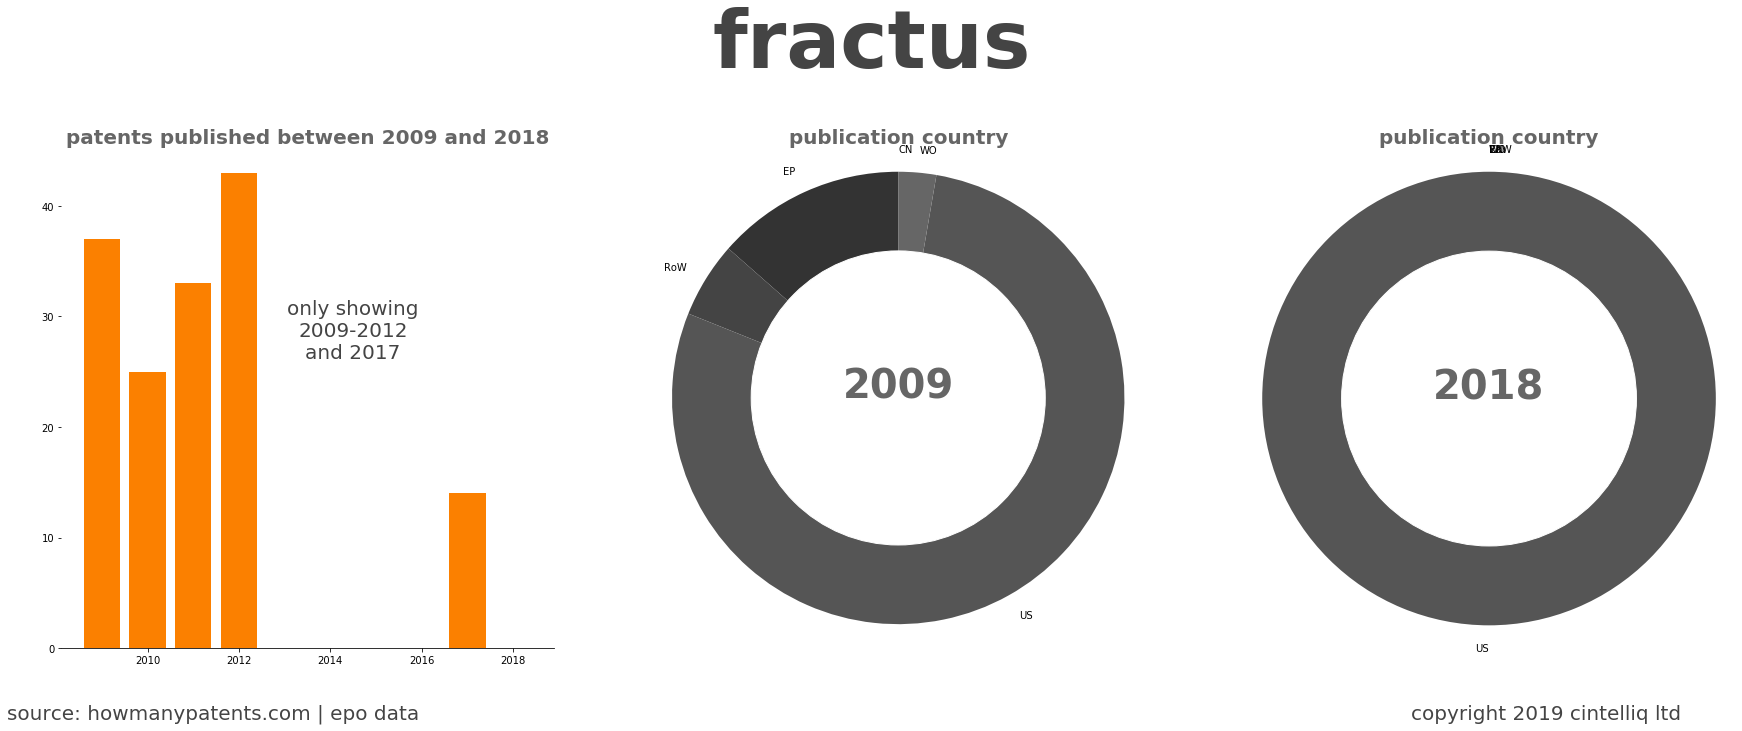 summary of patents for Fractus